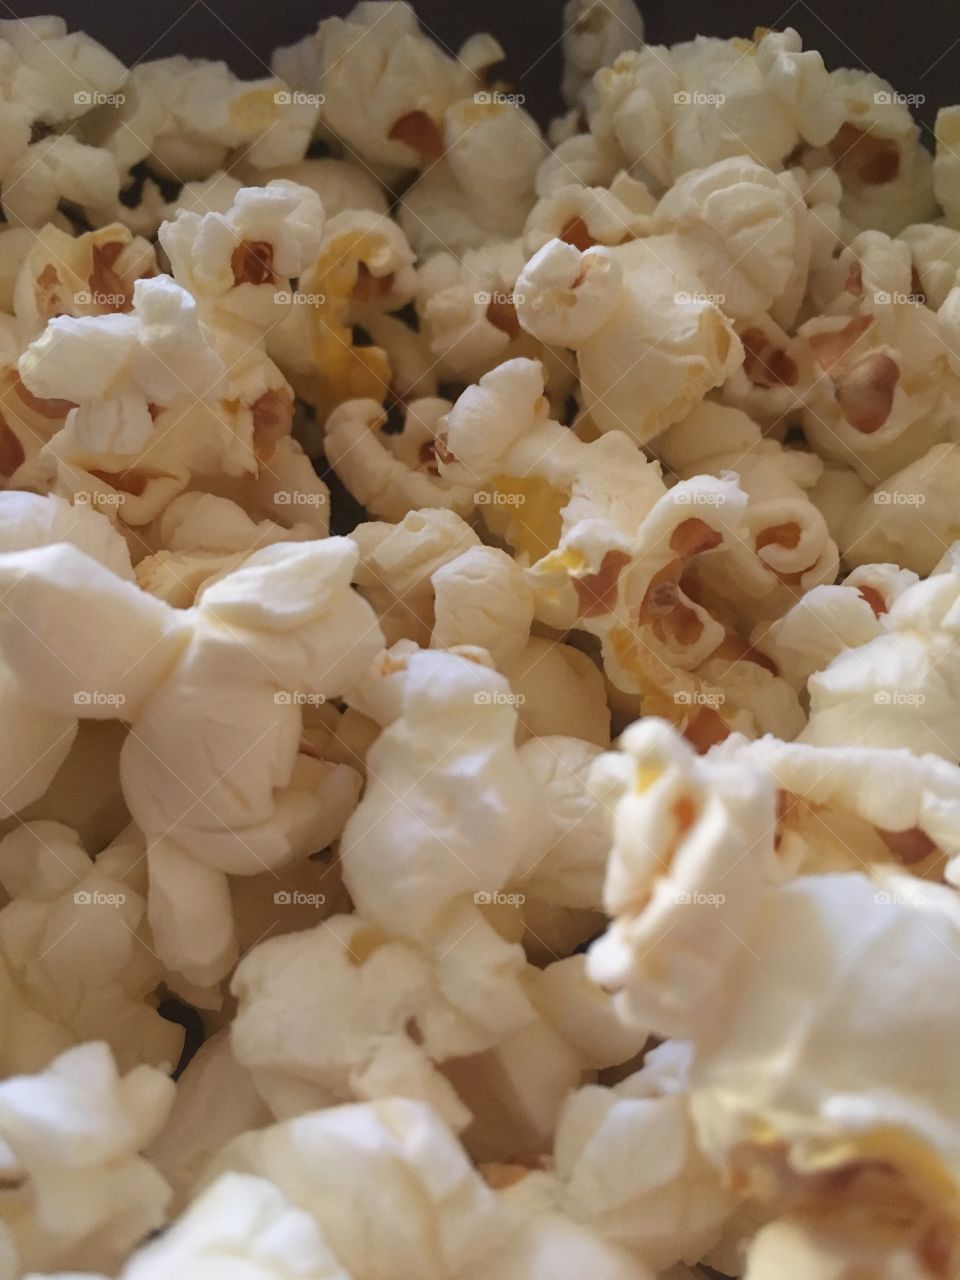 Popcorn! Movie time and healthy snack time!